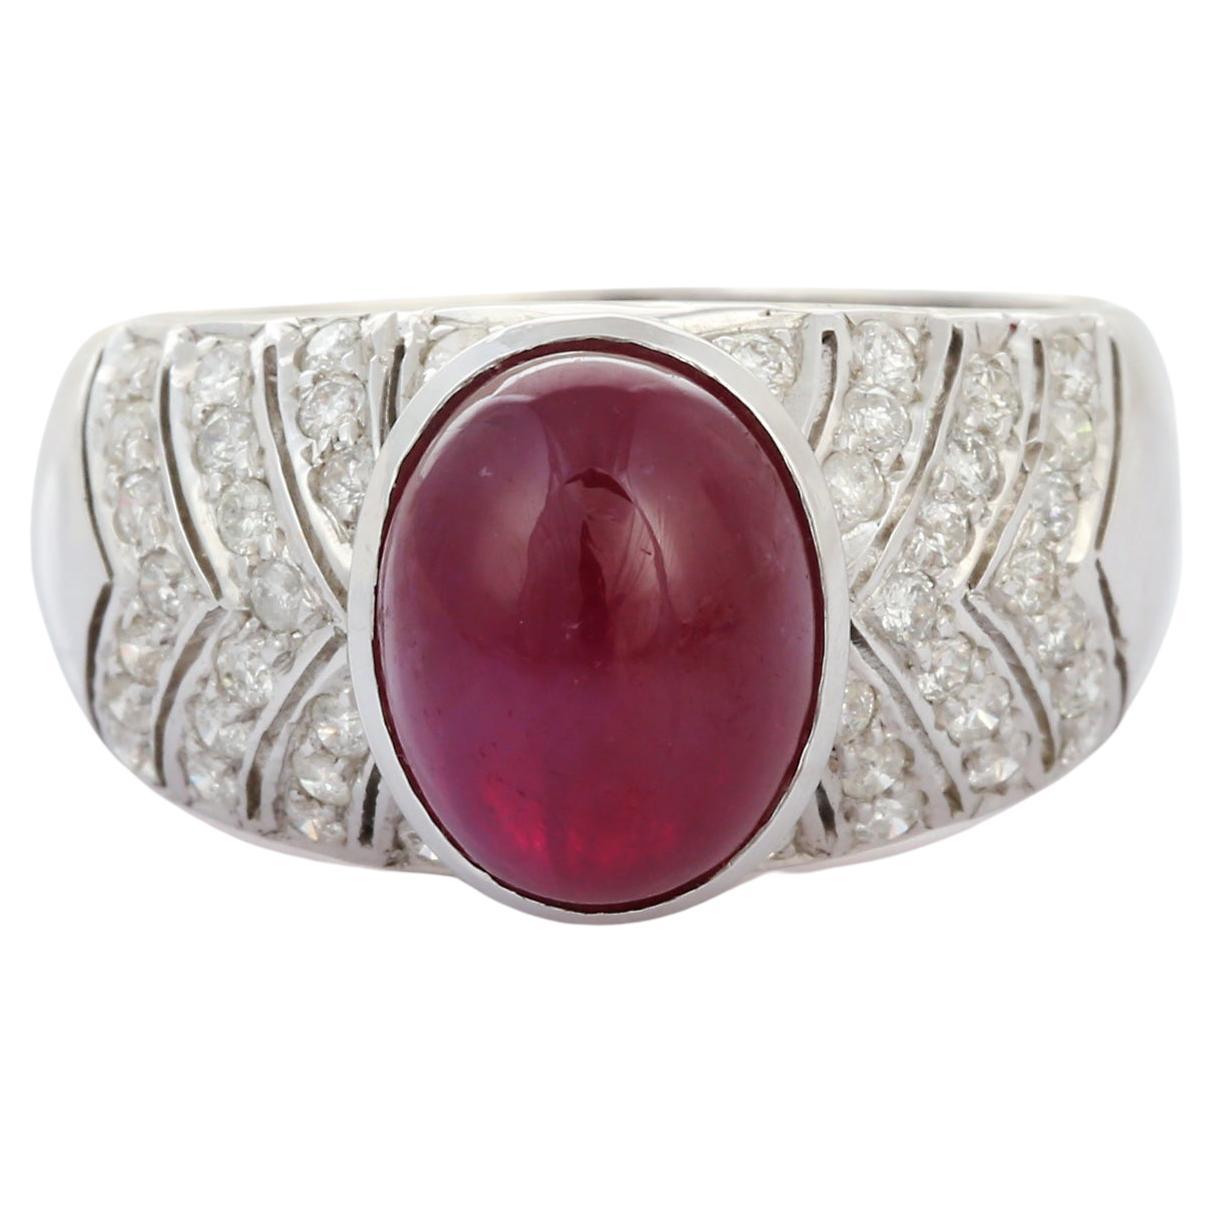 4.56 Carat Cabochon Ruby Cocktail Ring with Diamonds in 14K Solid White Gold